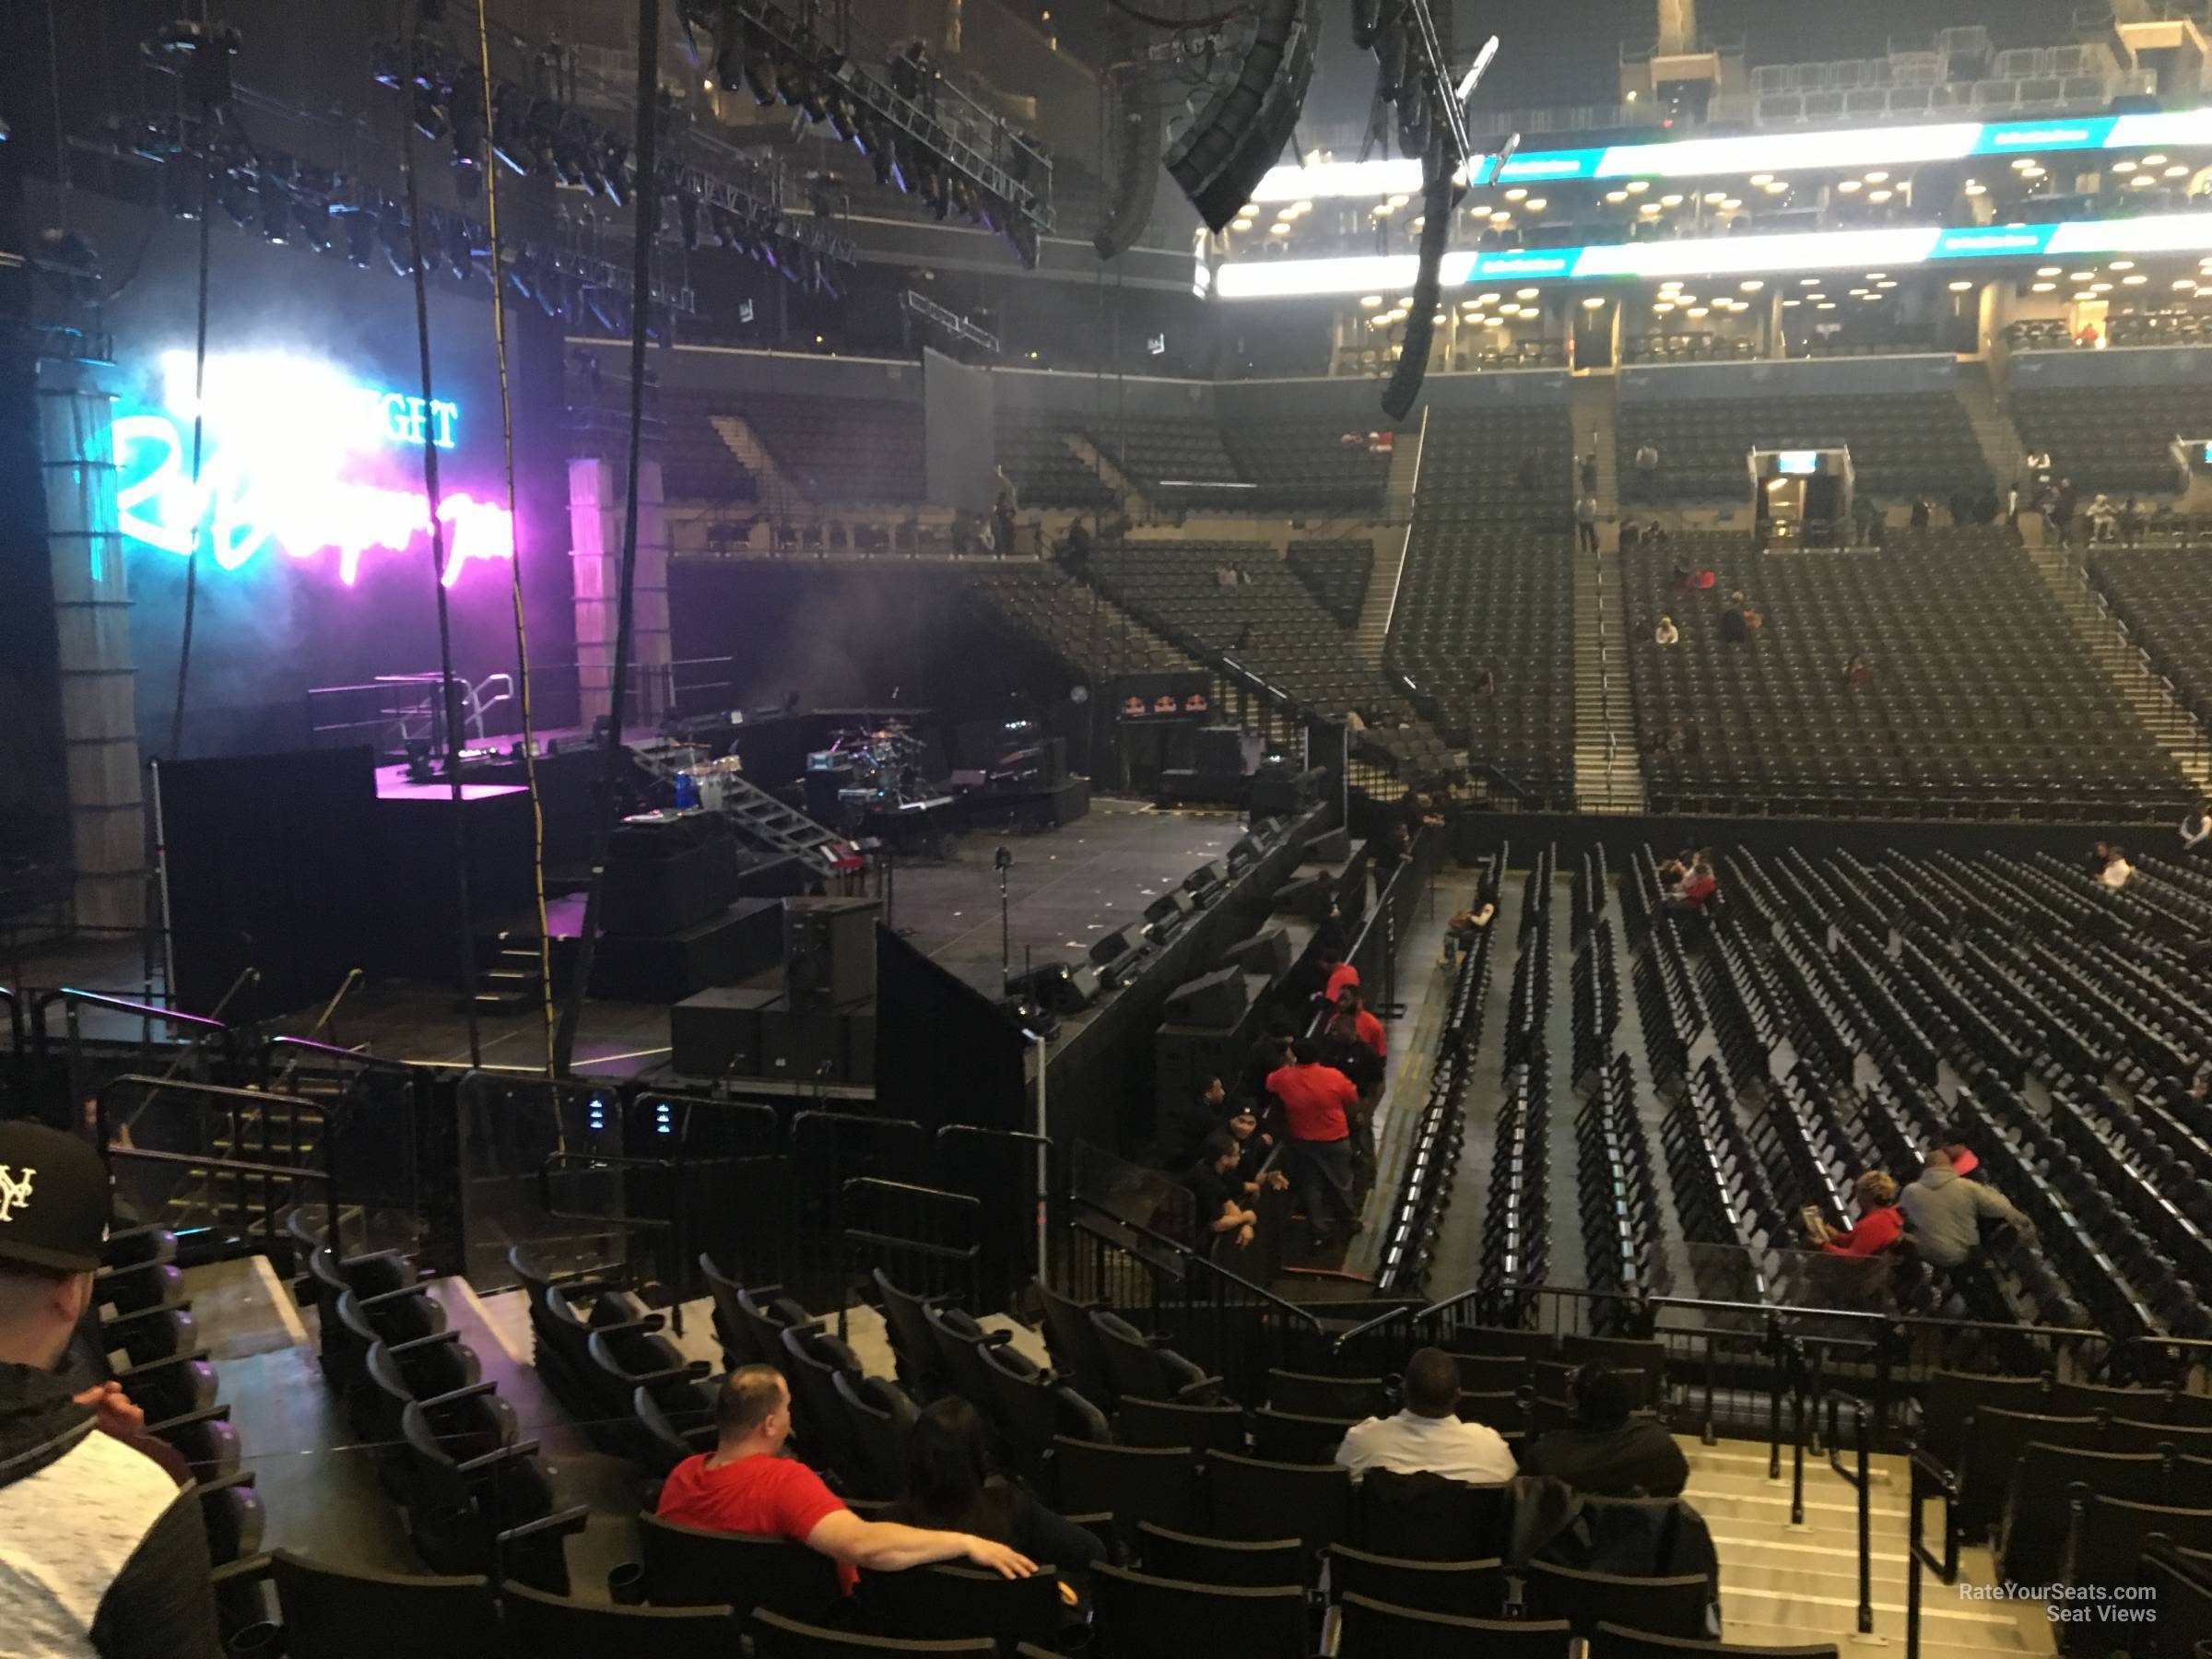 Barclays Center Section 26 Concert Seating - RateYourSeats.com